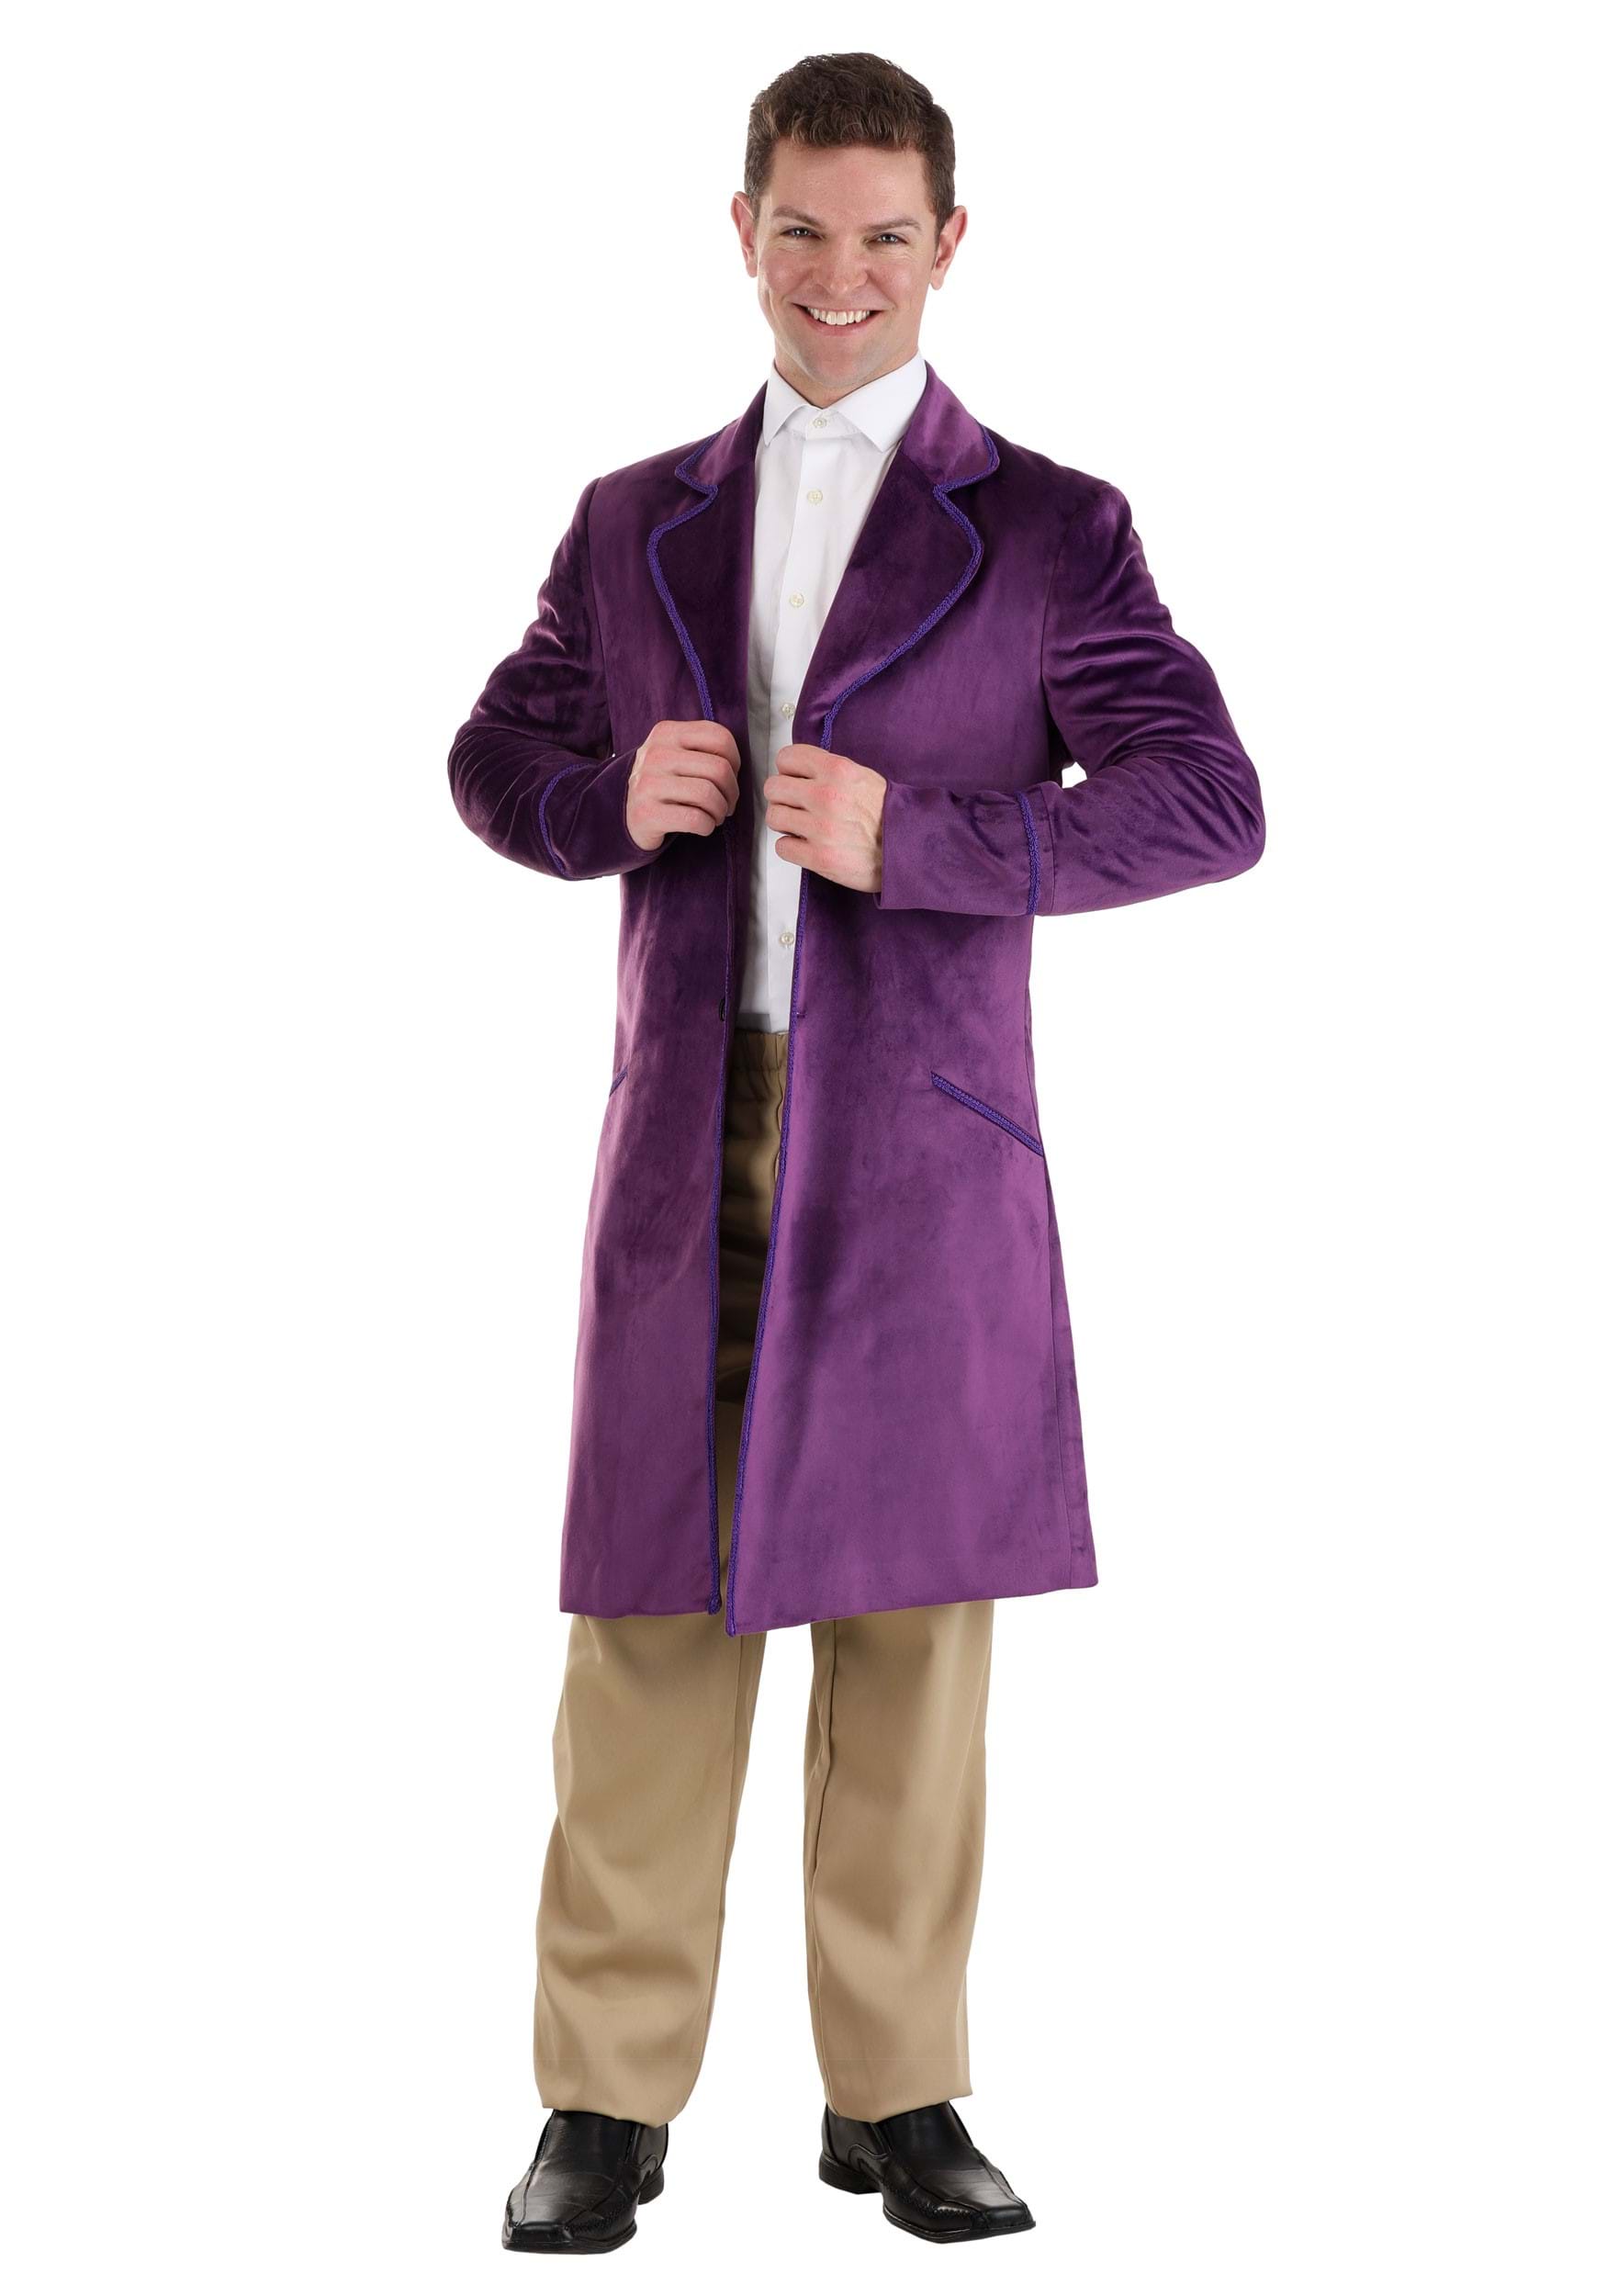 Image of Authentic Willy Wonka Costume Jacket for Men | Willy Wonka Costumes ID FUN1986AD-46